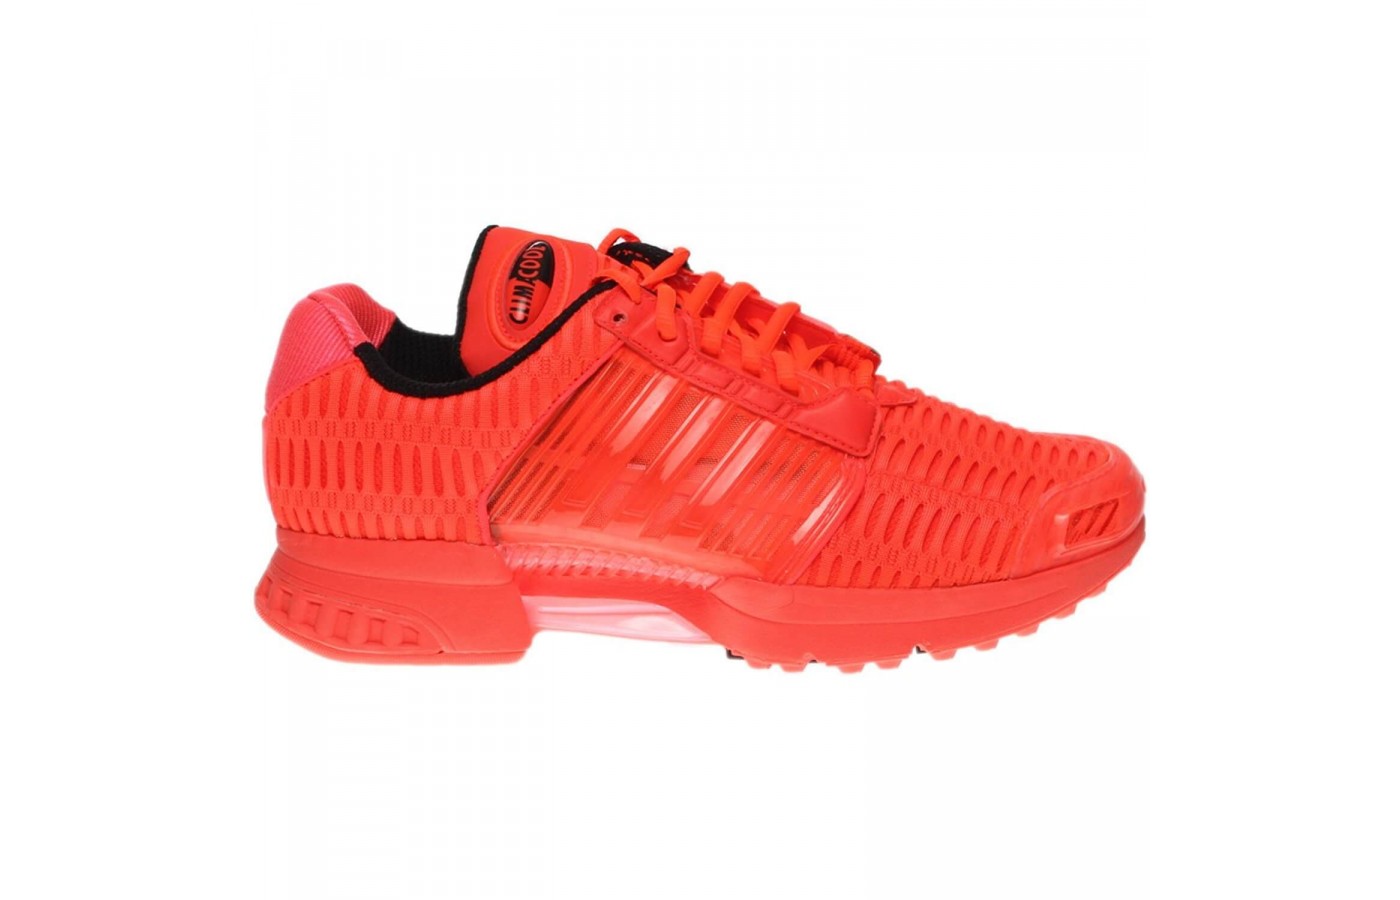 Great side view of Adidas ClimaCool 1